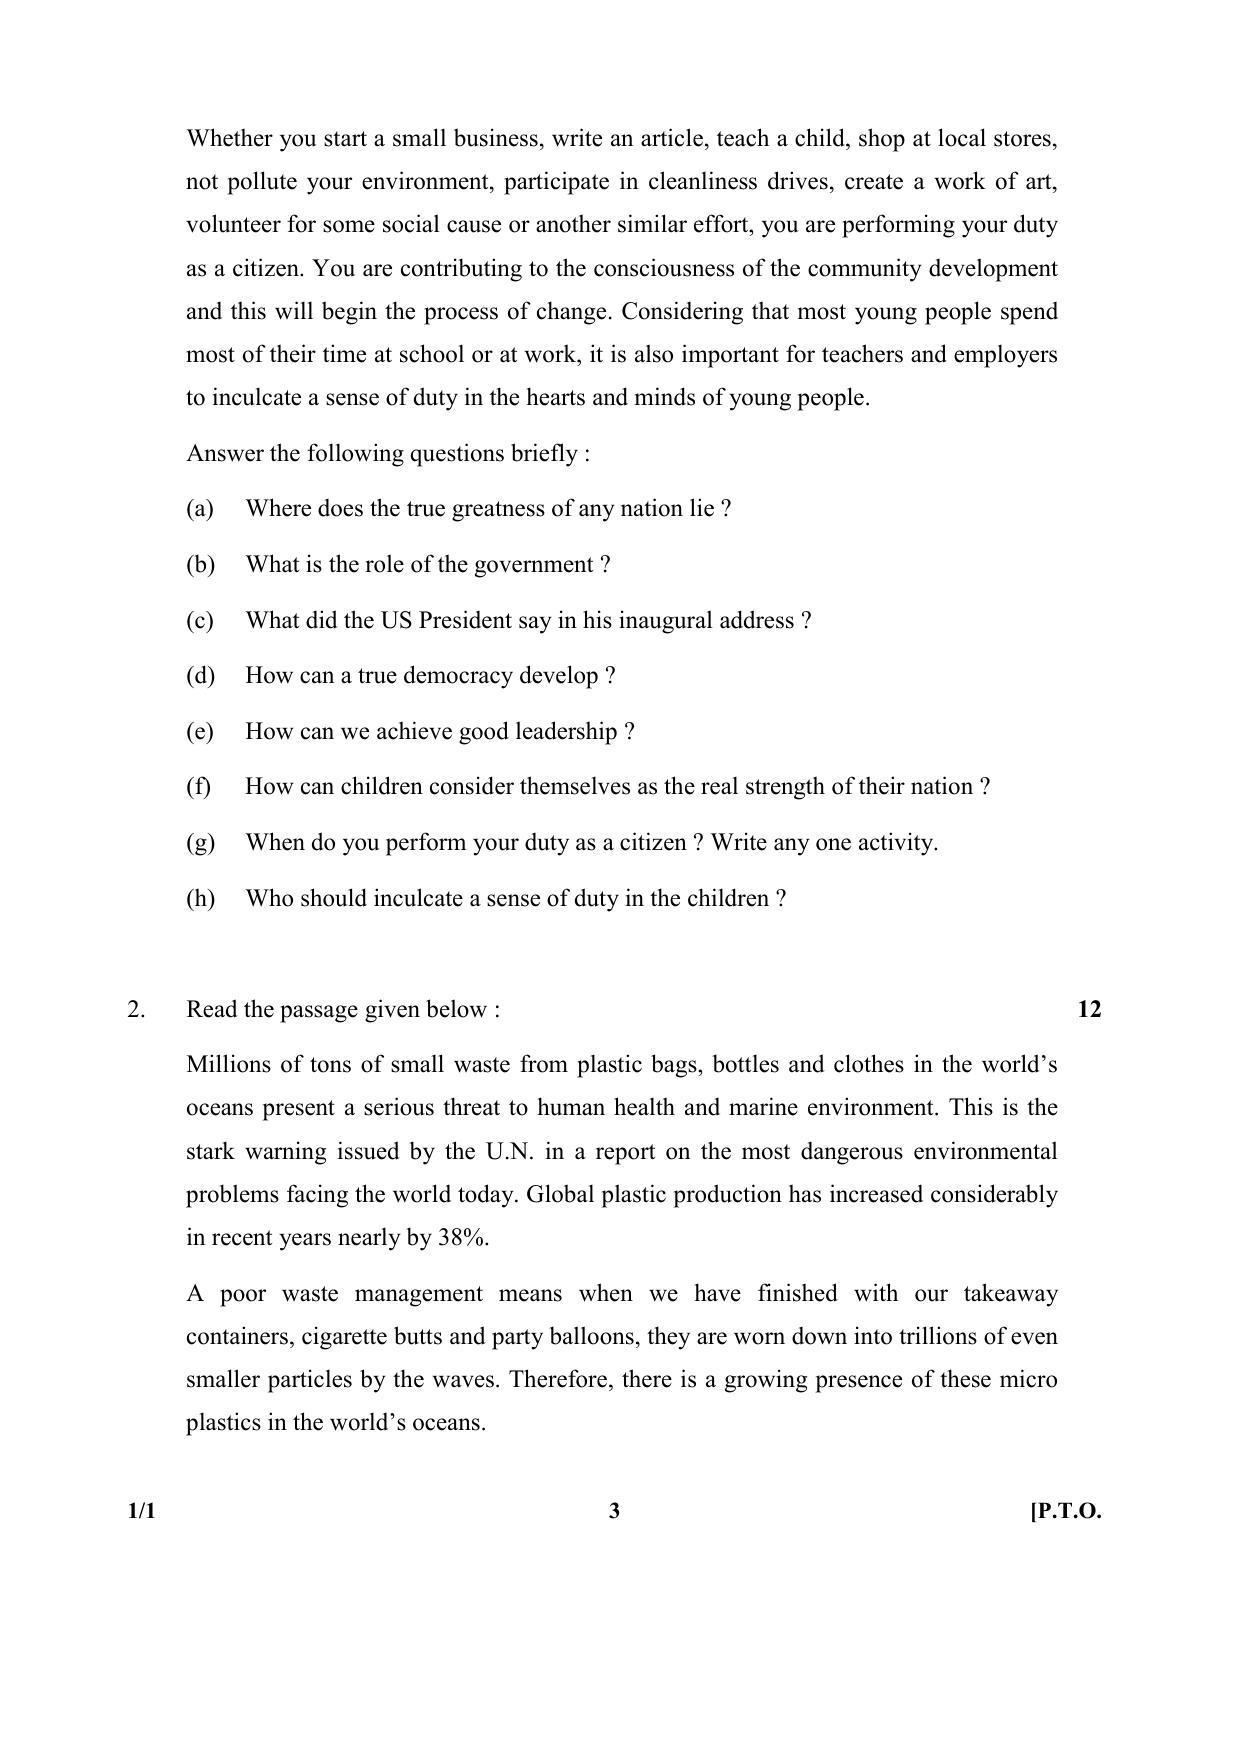 CBSE Class 10 1-1 (English) 2017-comptt Question Paper - Page 3